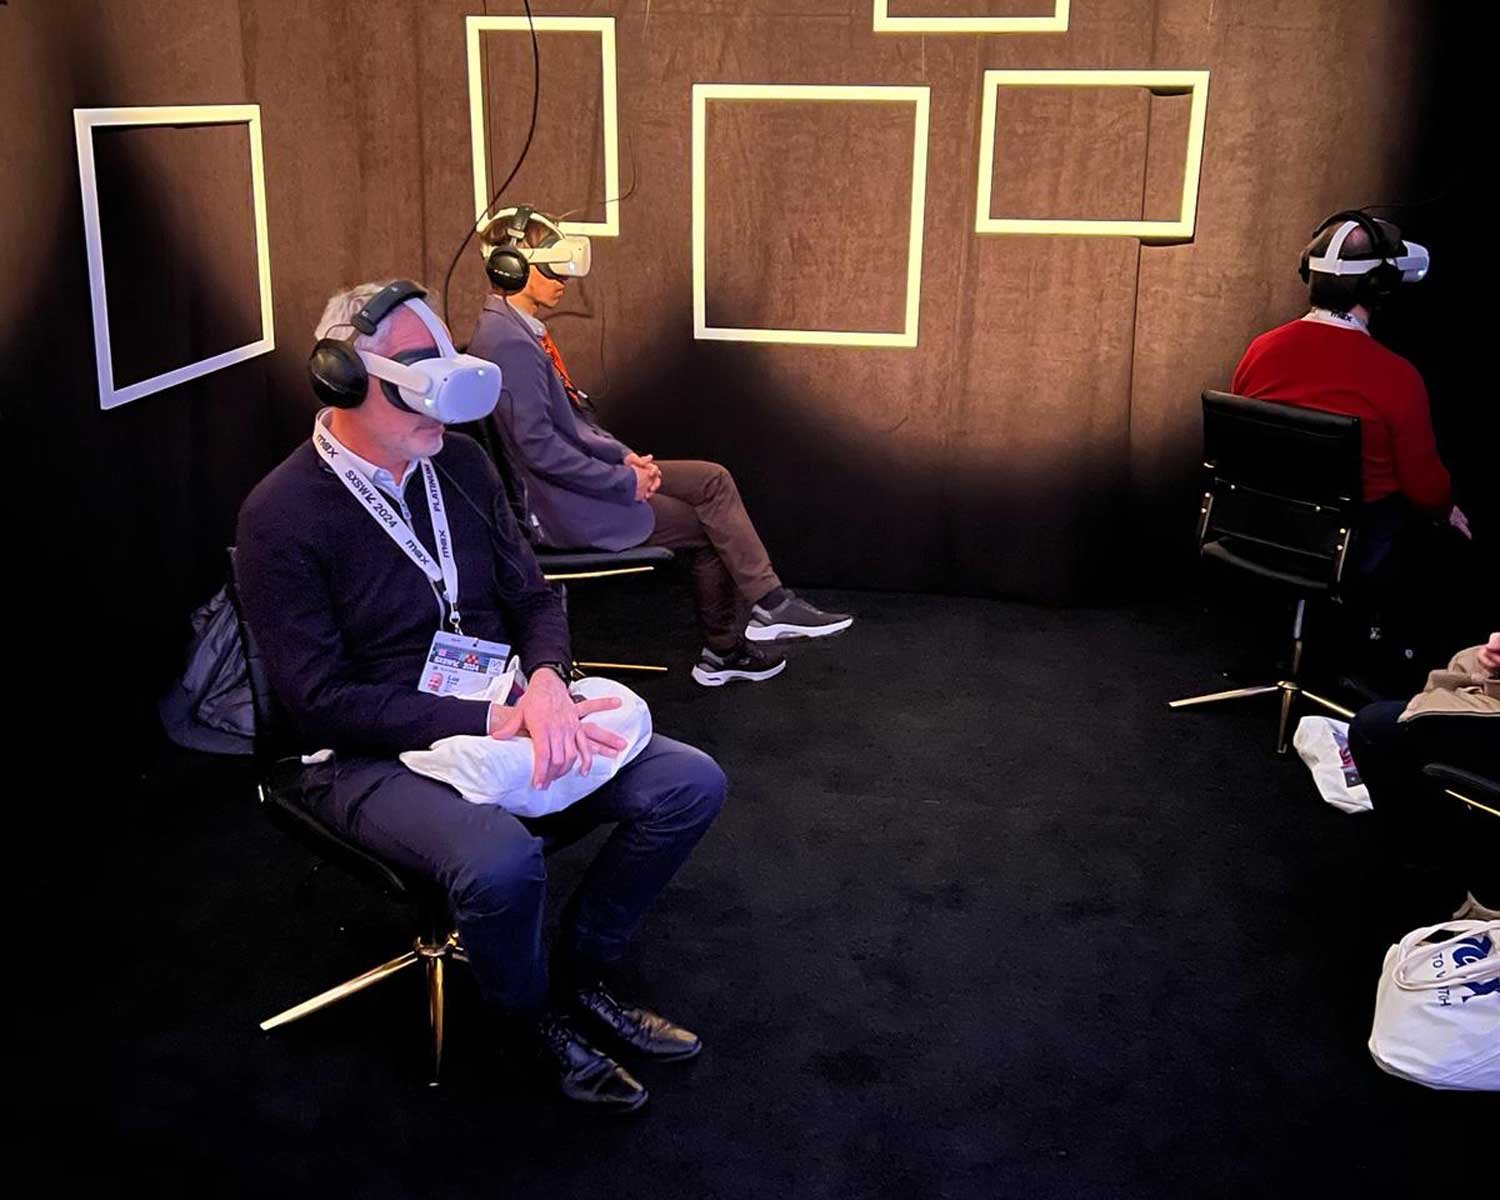 The VR Viewing Room